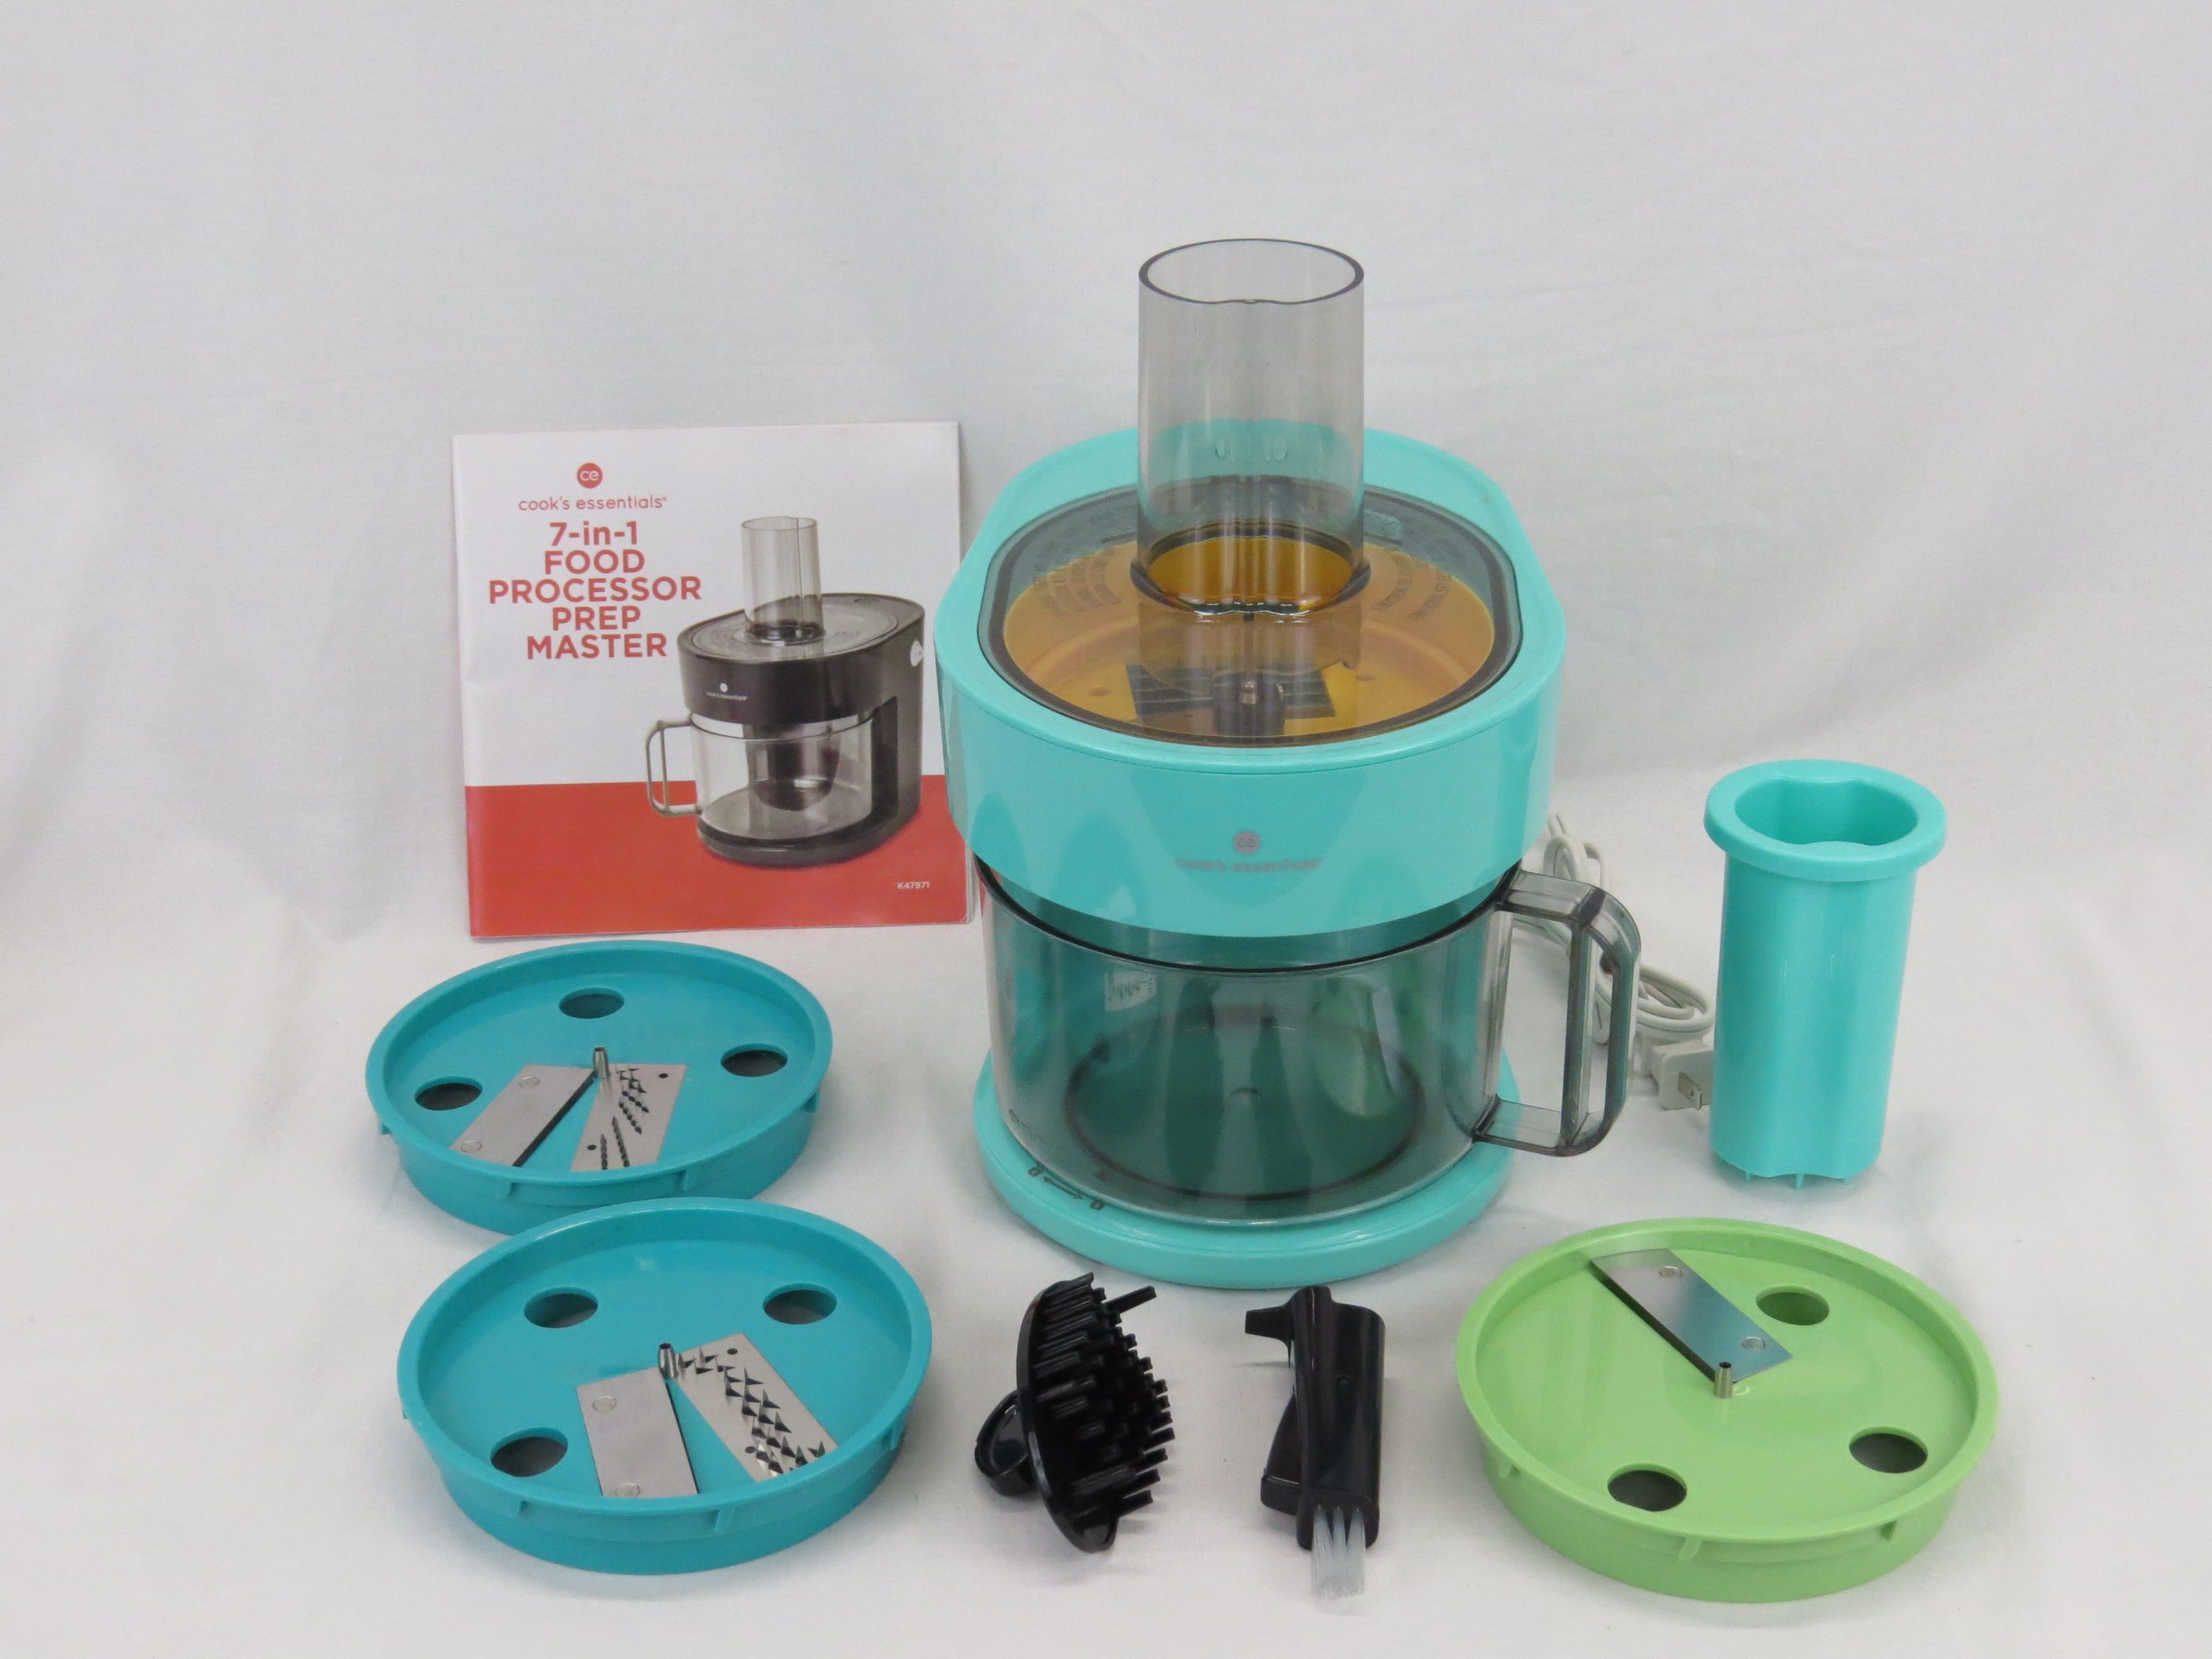 Like New Cook's Essentials 7-in-1 Food Processor Teal